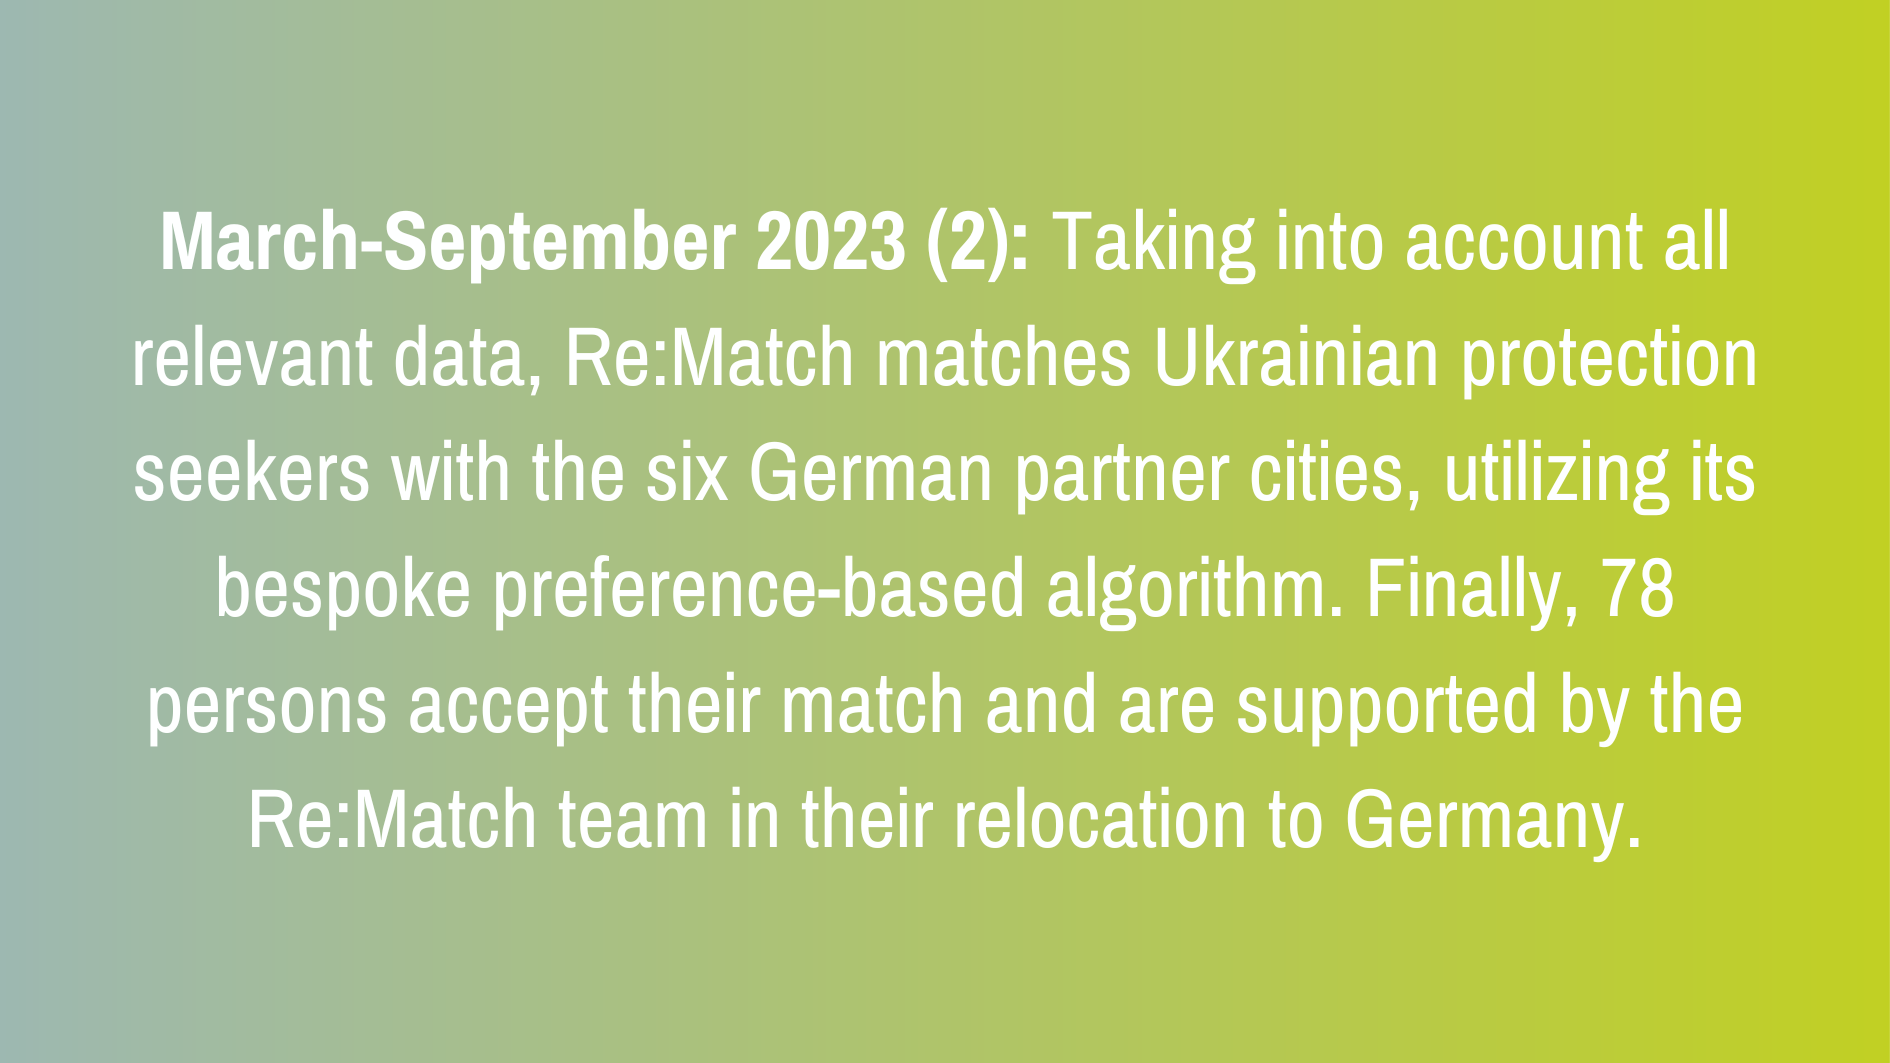 March-September 2023 (2): Taking into account all relevant data, Re:Match matches Ukrainian protection seekers with the six German partner cities, utilizing its bespoke preference-based algorithm. Finally, 78 persons accept their match and are supported by the Re:Match team in their relocation to Germany.